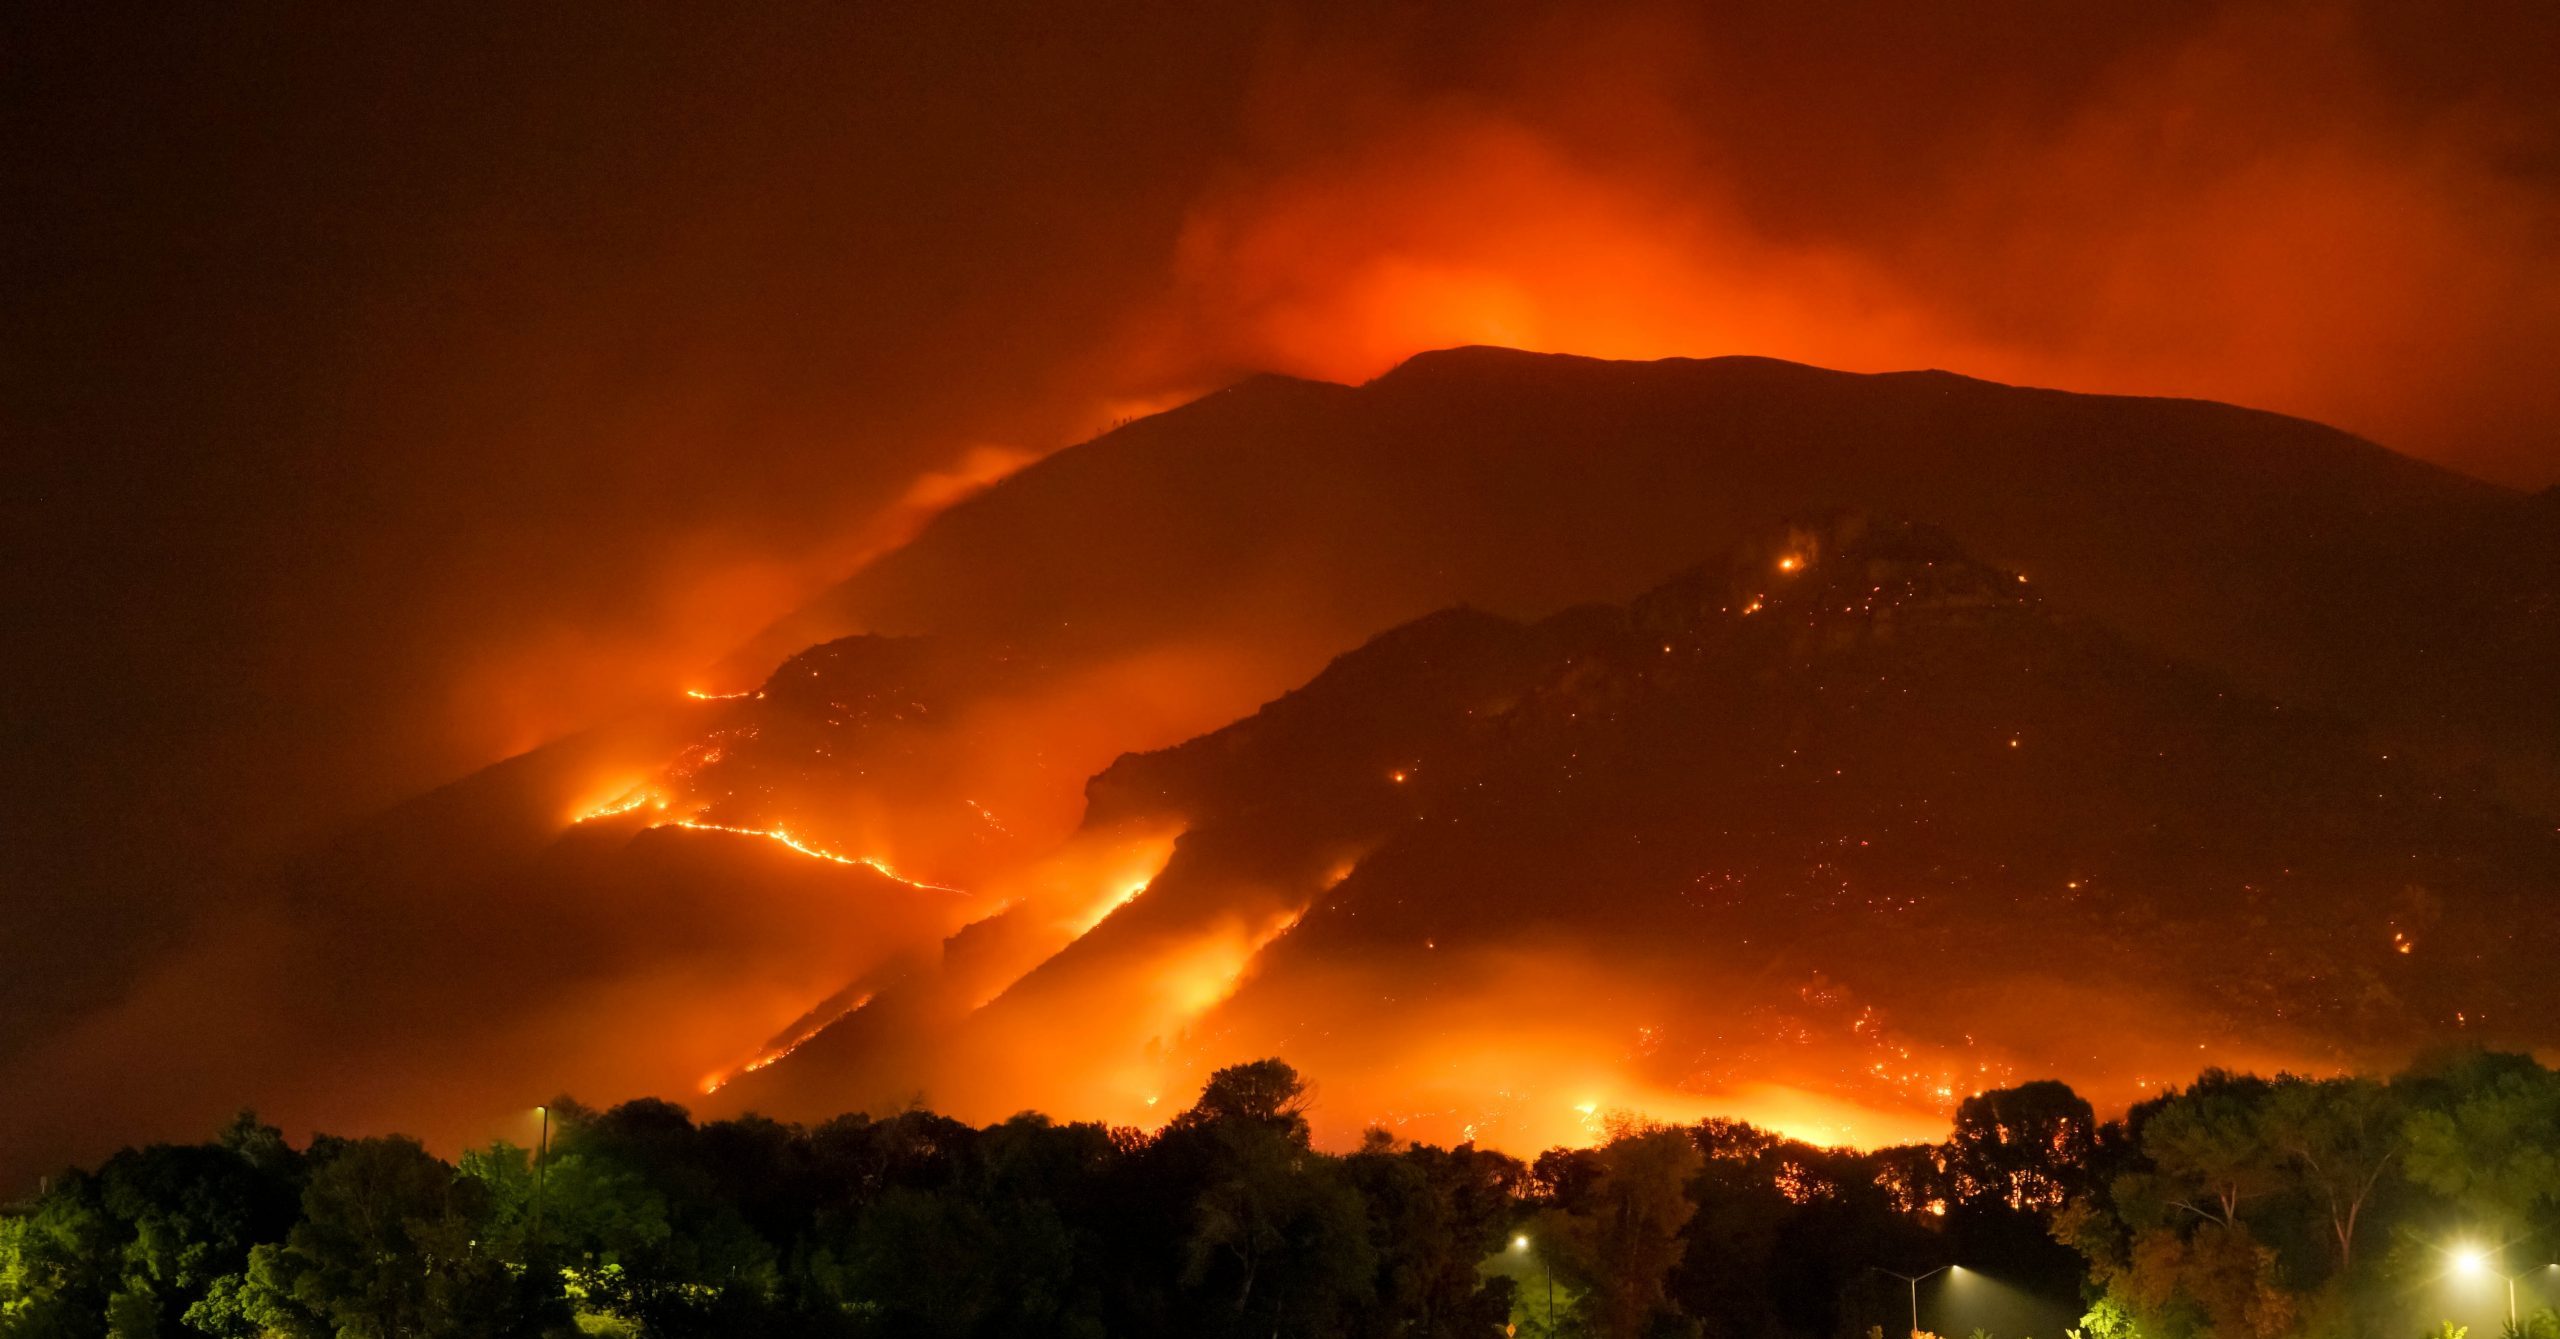 DriveSavers Offers Data Recovery to Victims of California Wildfires